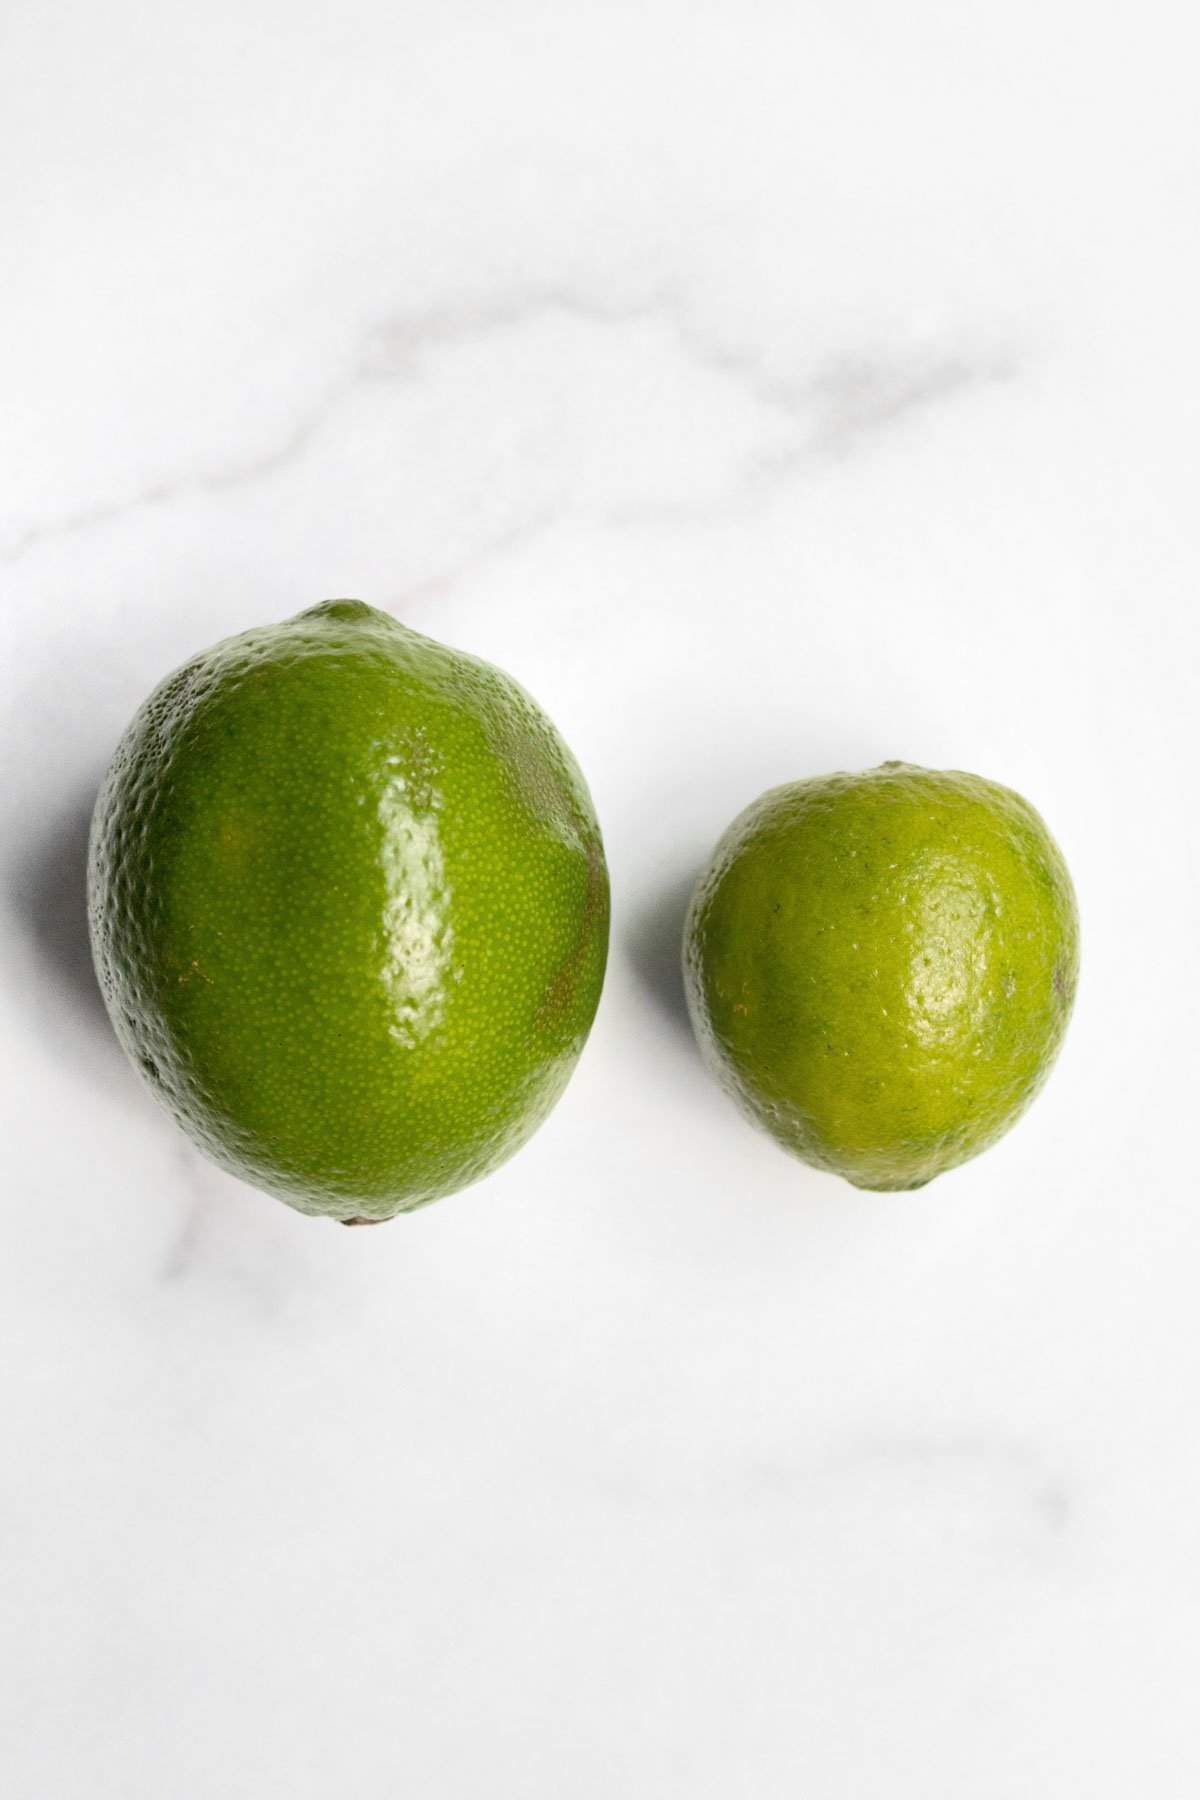 A regular lime on the left is four times as big as the key lime on the right.